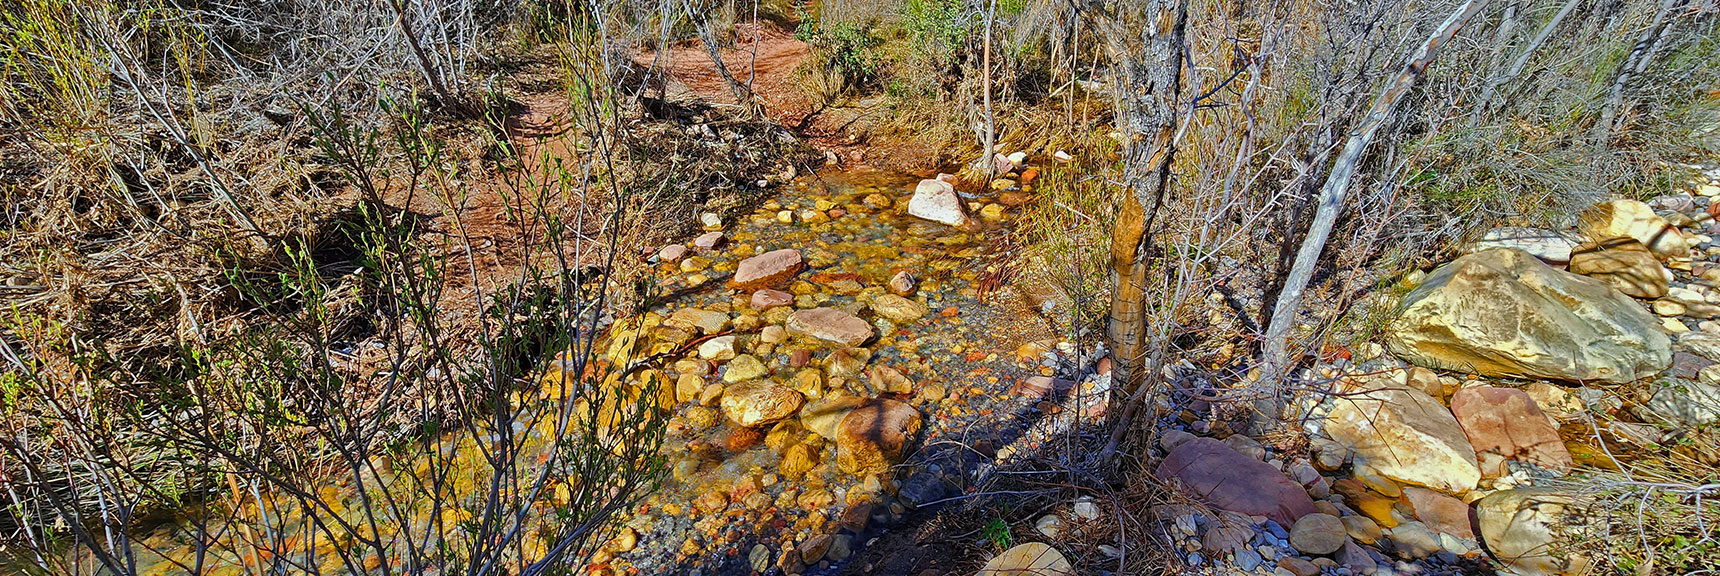 Pine Creek Crossing During Spring Runoff | Knoll Trail | Red Rock Canyon National Conservation Area, Nevada | David Smith | LasVegasAreaTrails.com